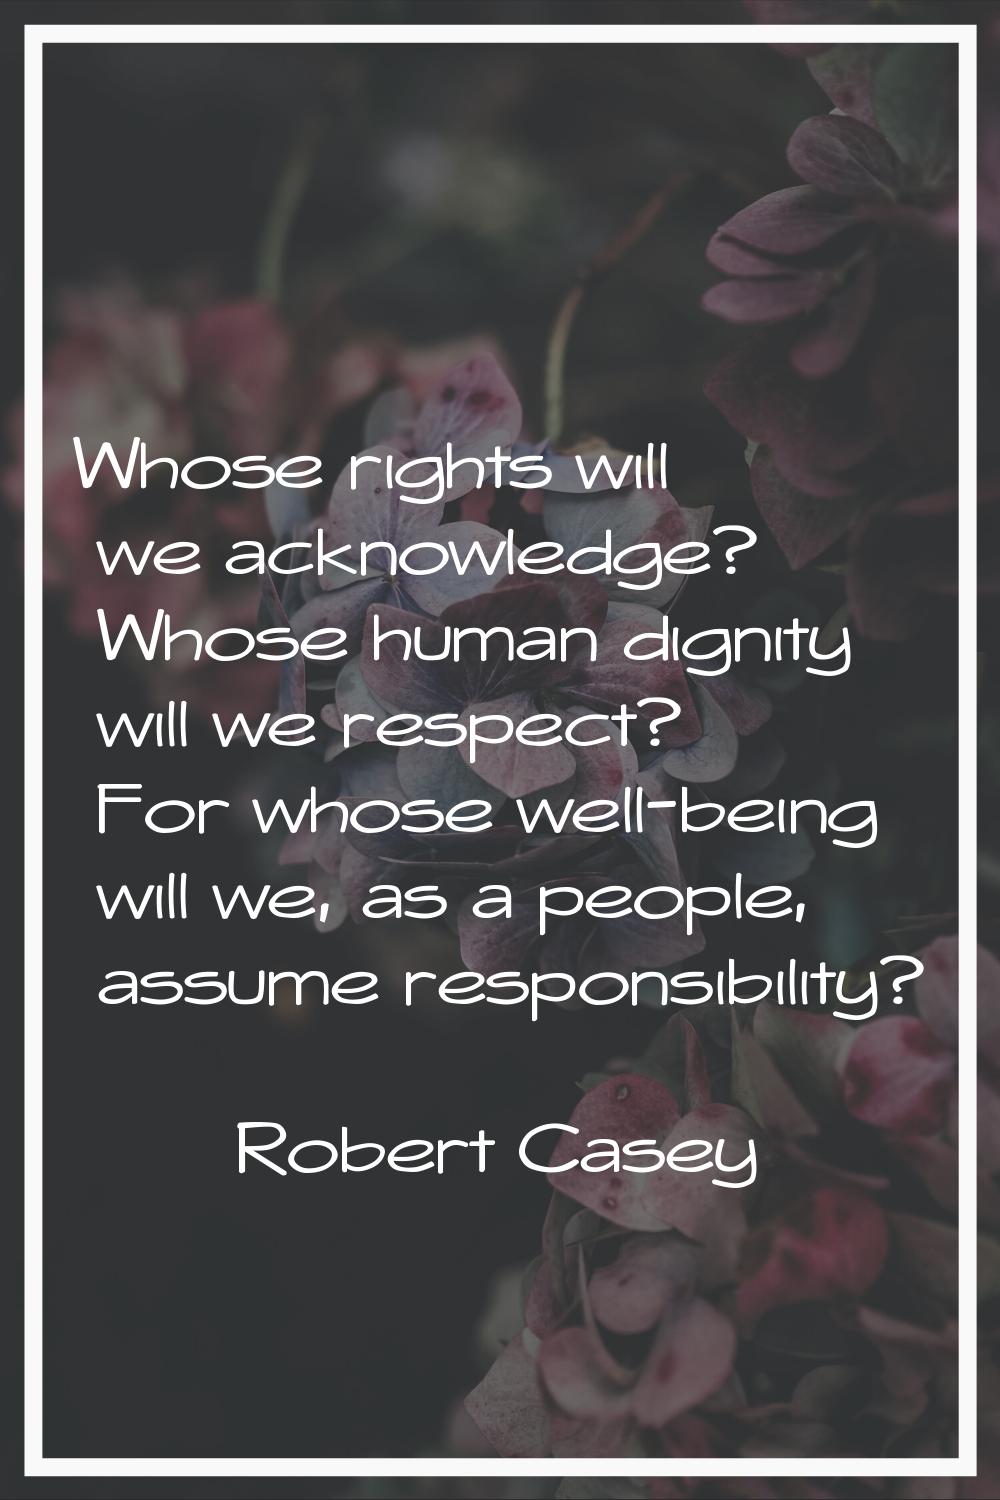 Whose rights will we acknowledge? Whose human dignity will we respect? For whose well-being will we